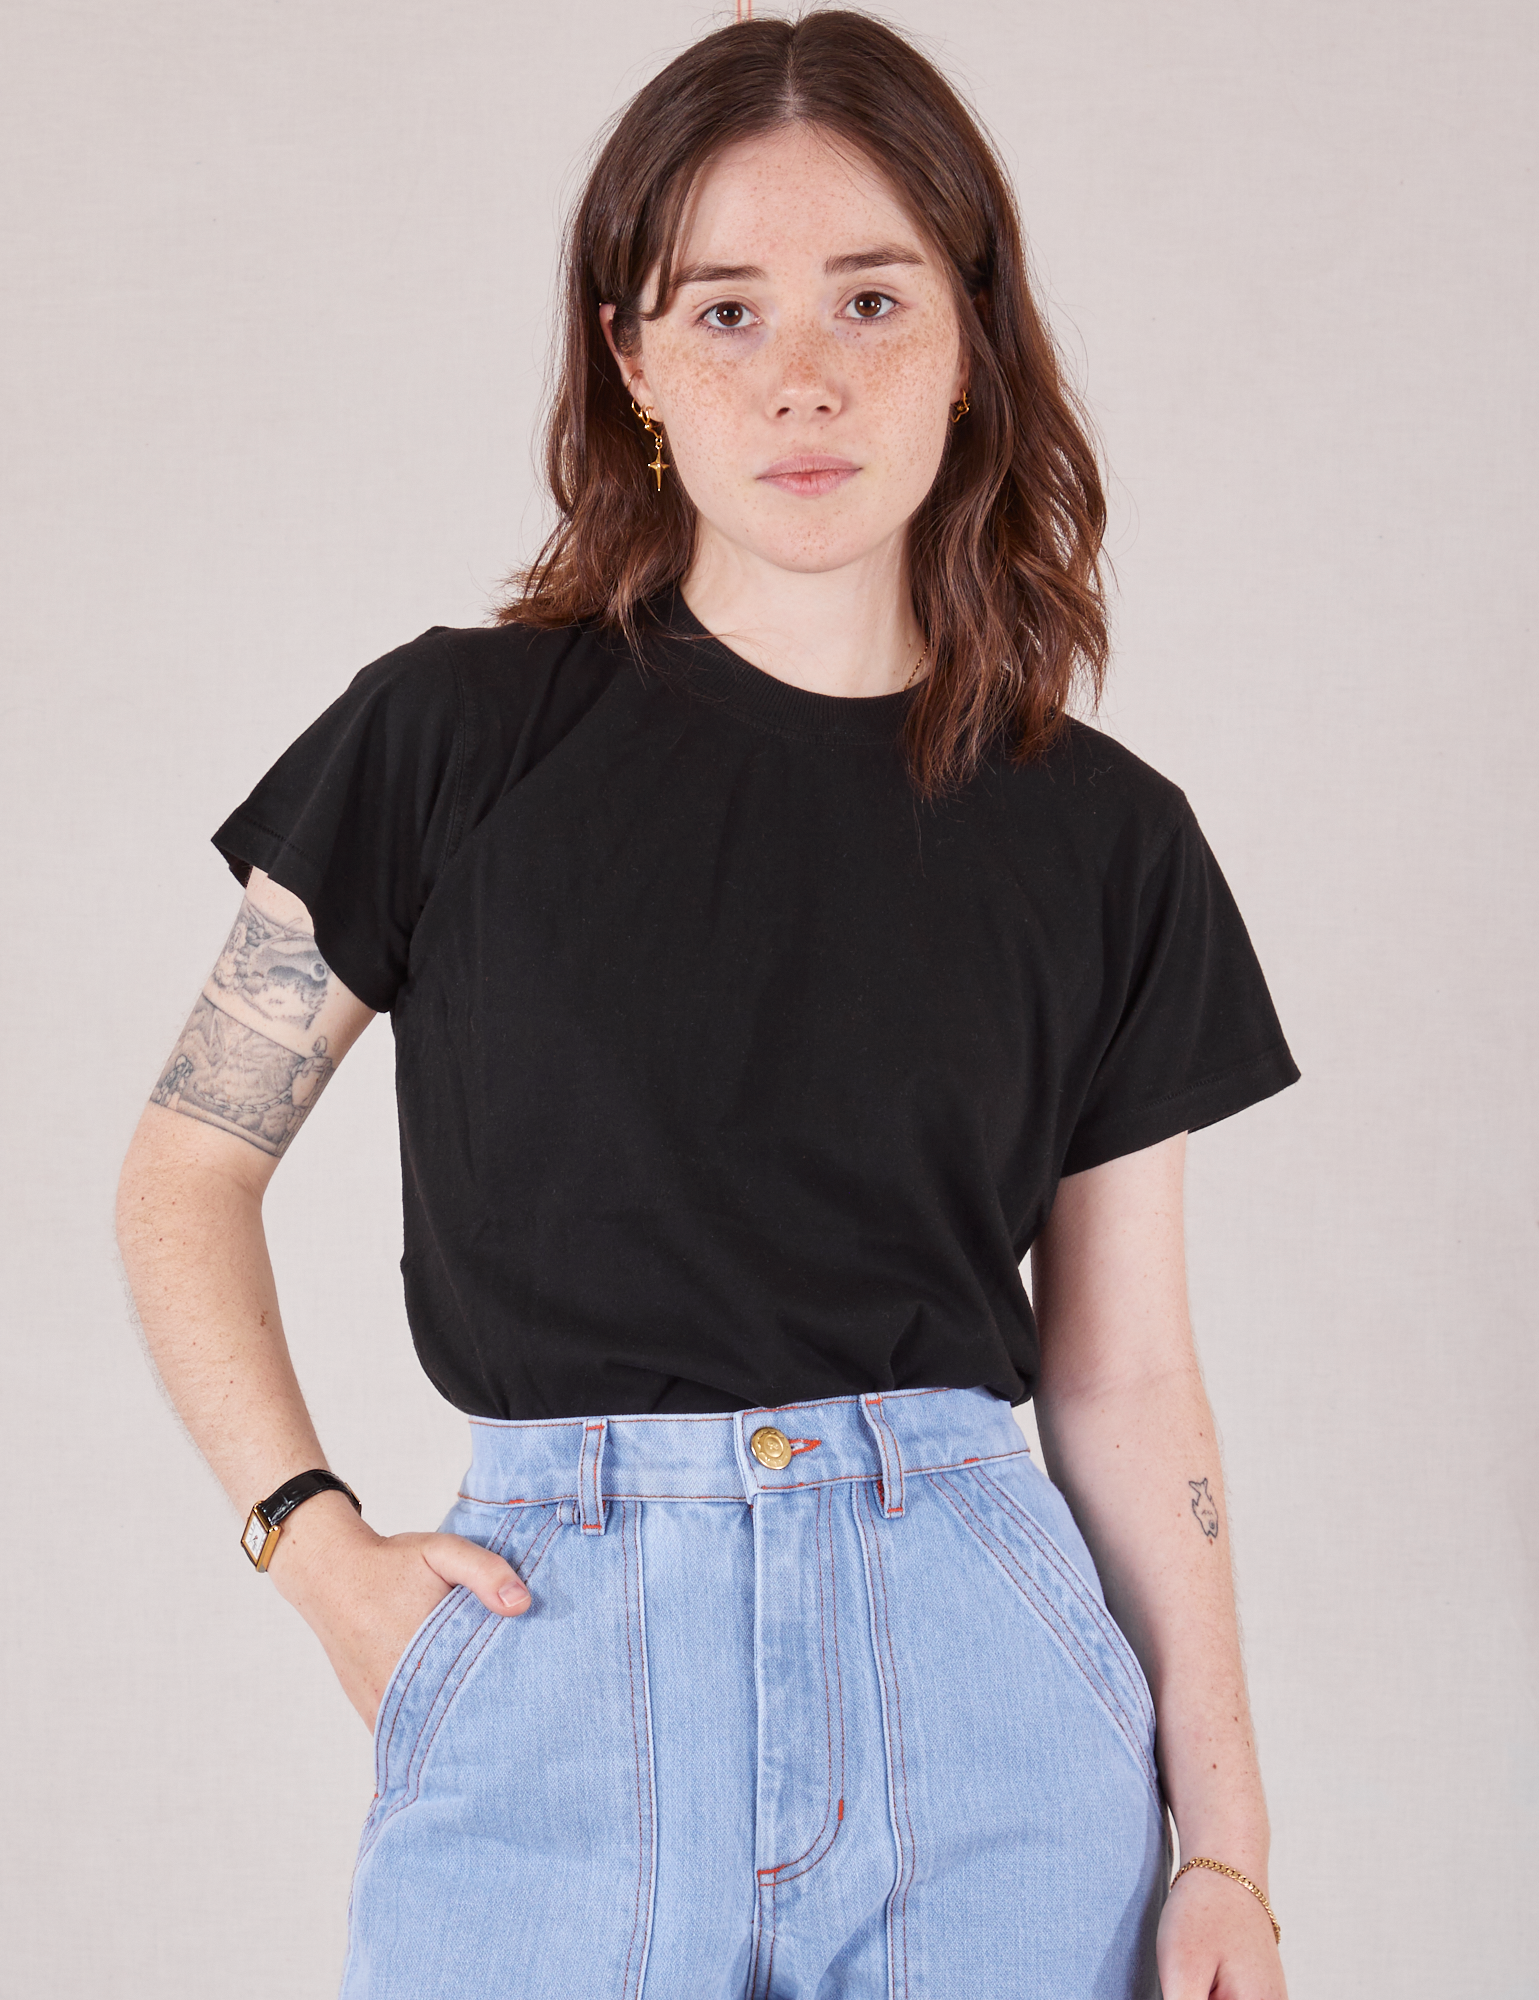 Hana is 5'3" and wearing P Organic Vintage Tee in Basic Black tucked into light wash Carpenter Jeans